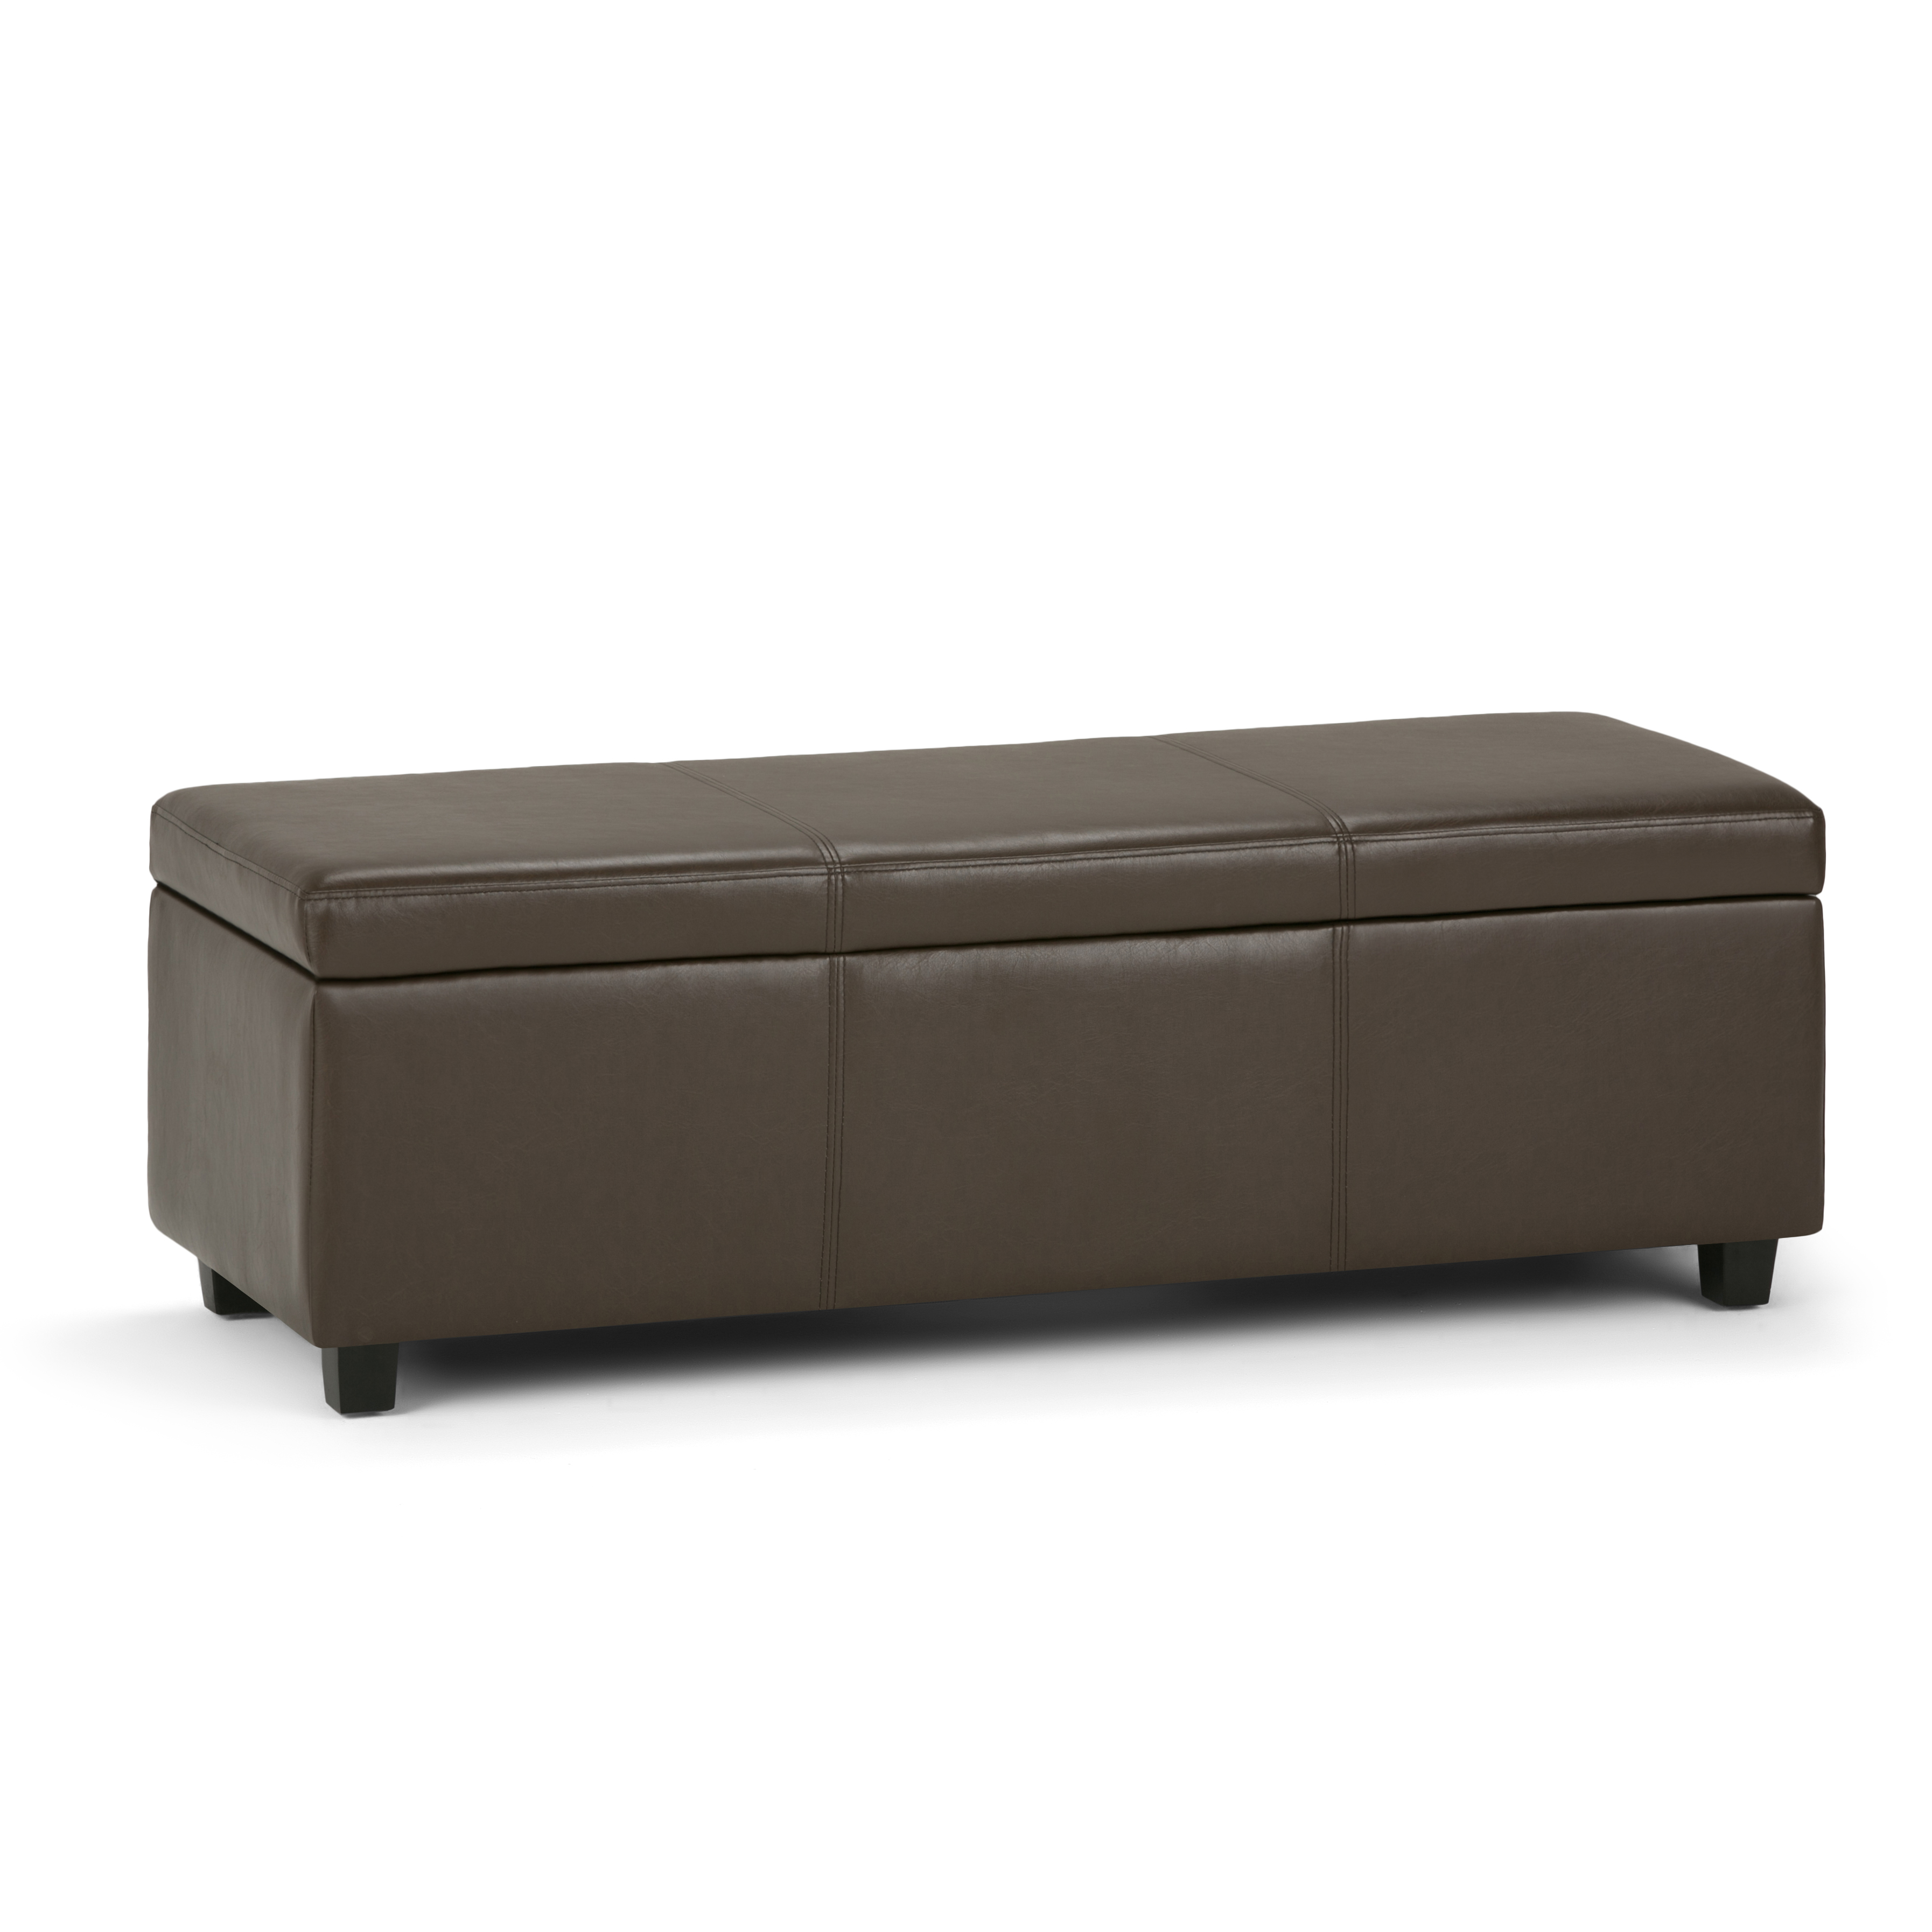 Simpli Home SIMPLIHOME Avalon 48 Inch Wide Contemporary Rectangle Storage Ottoman Bench in Chocolate Brown Vegan Faux Leather, For the Livin